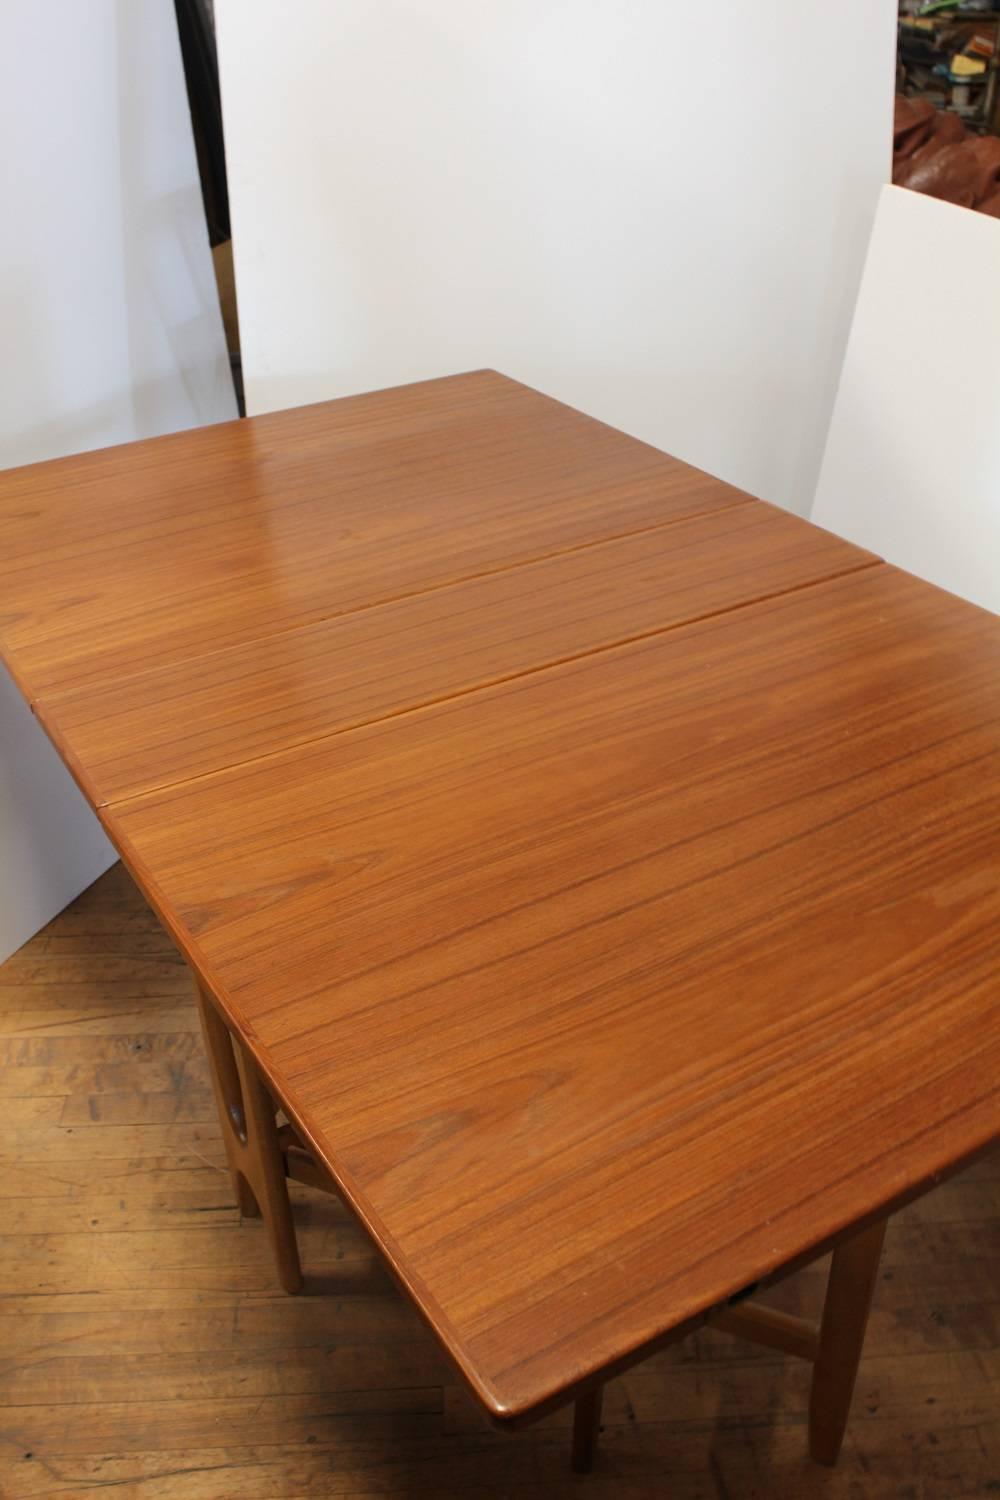 Midcentury Gateleg Folding Dinning Table, 2 available.  Dimensions: leaves folded down: 13.5″W x 35″D x 29″H, both leaves extended: 64″W x 35″D x 29″H